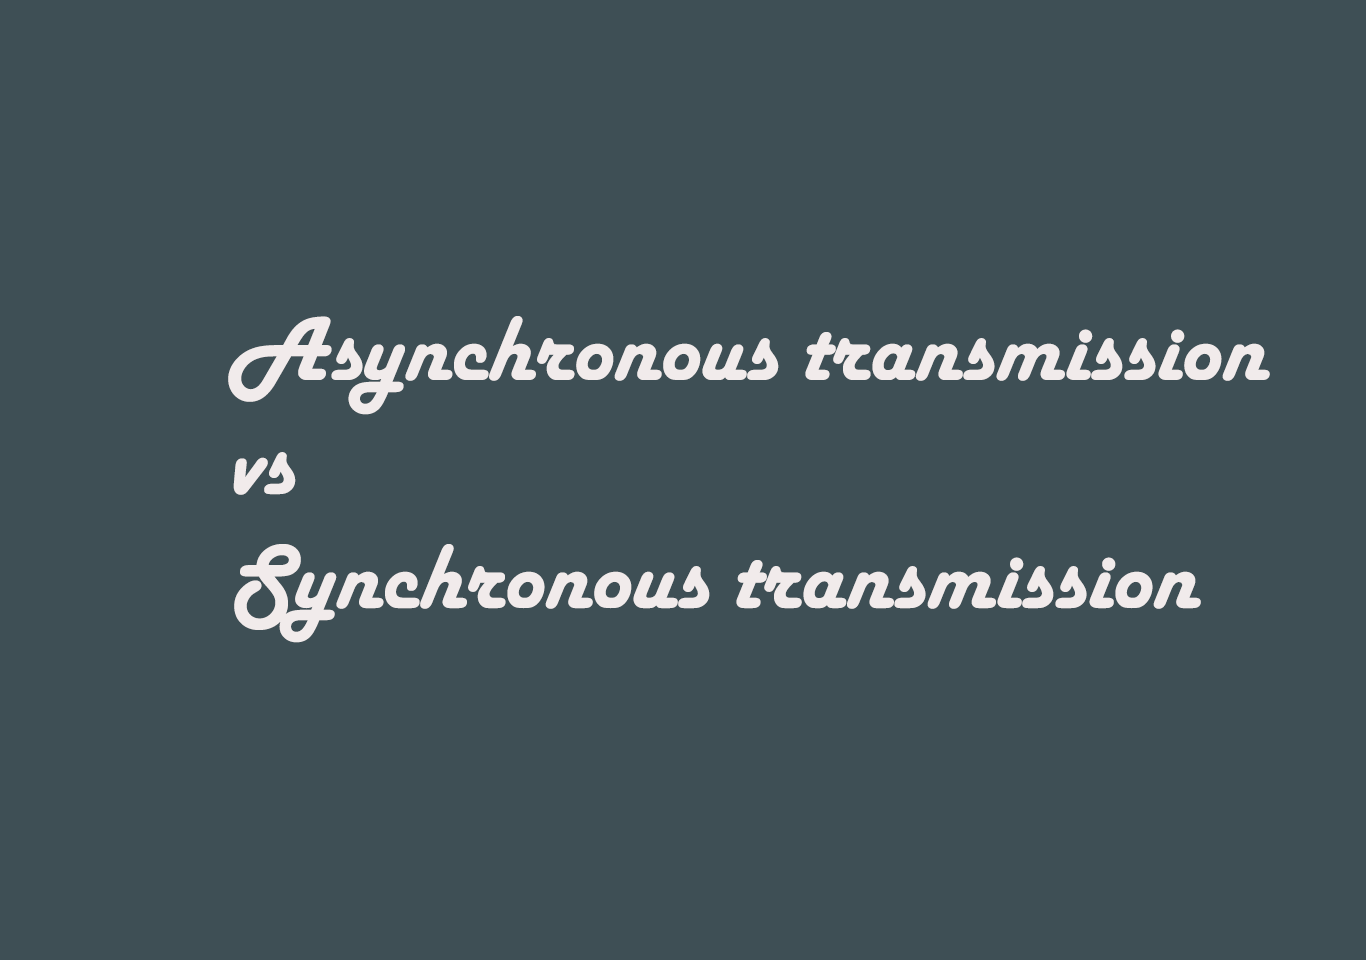 Synchronous and asynchronous